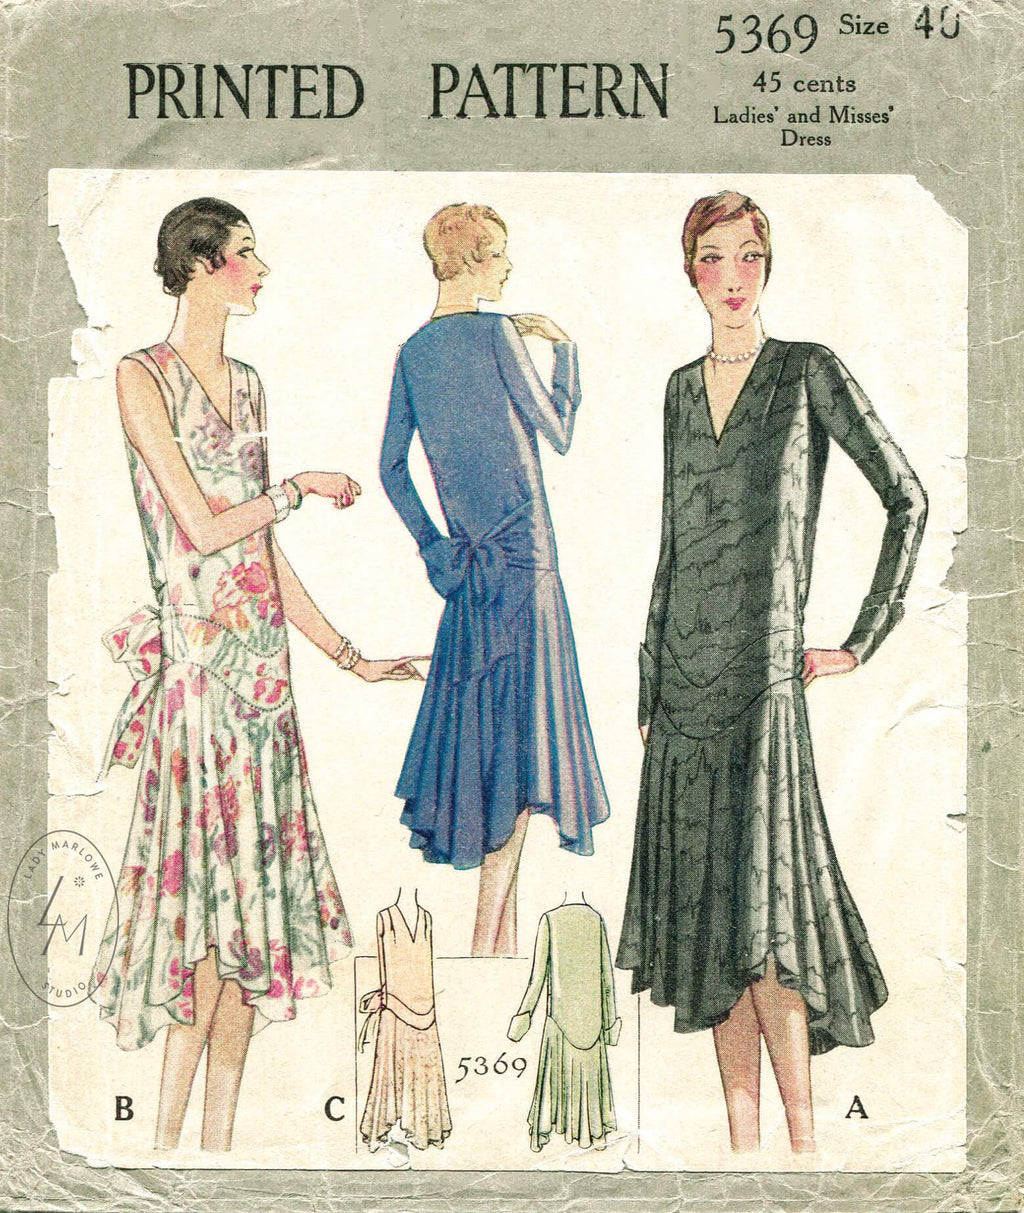 Slow Made in Germany Vintage Patterns